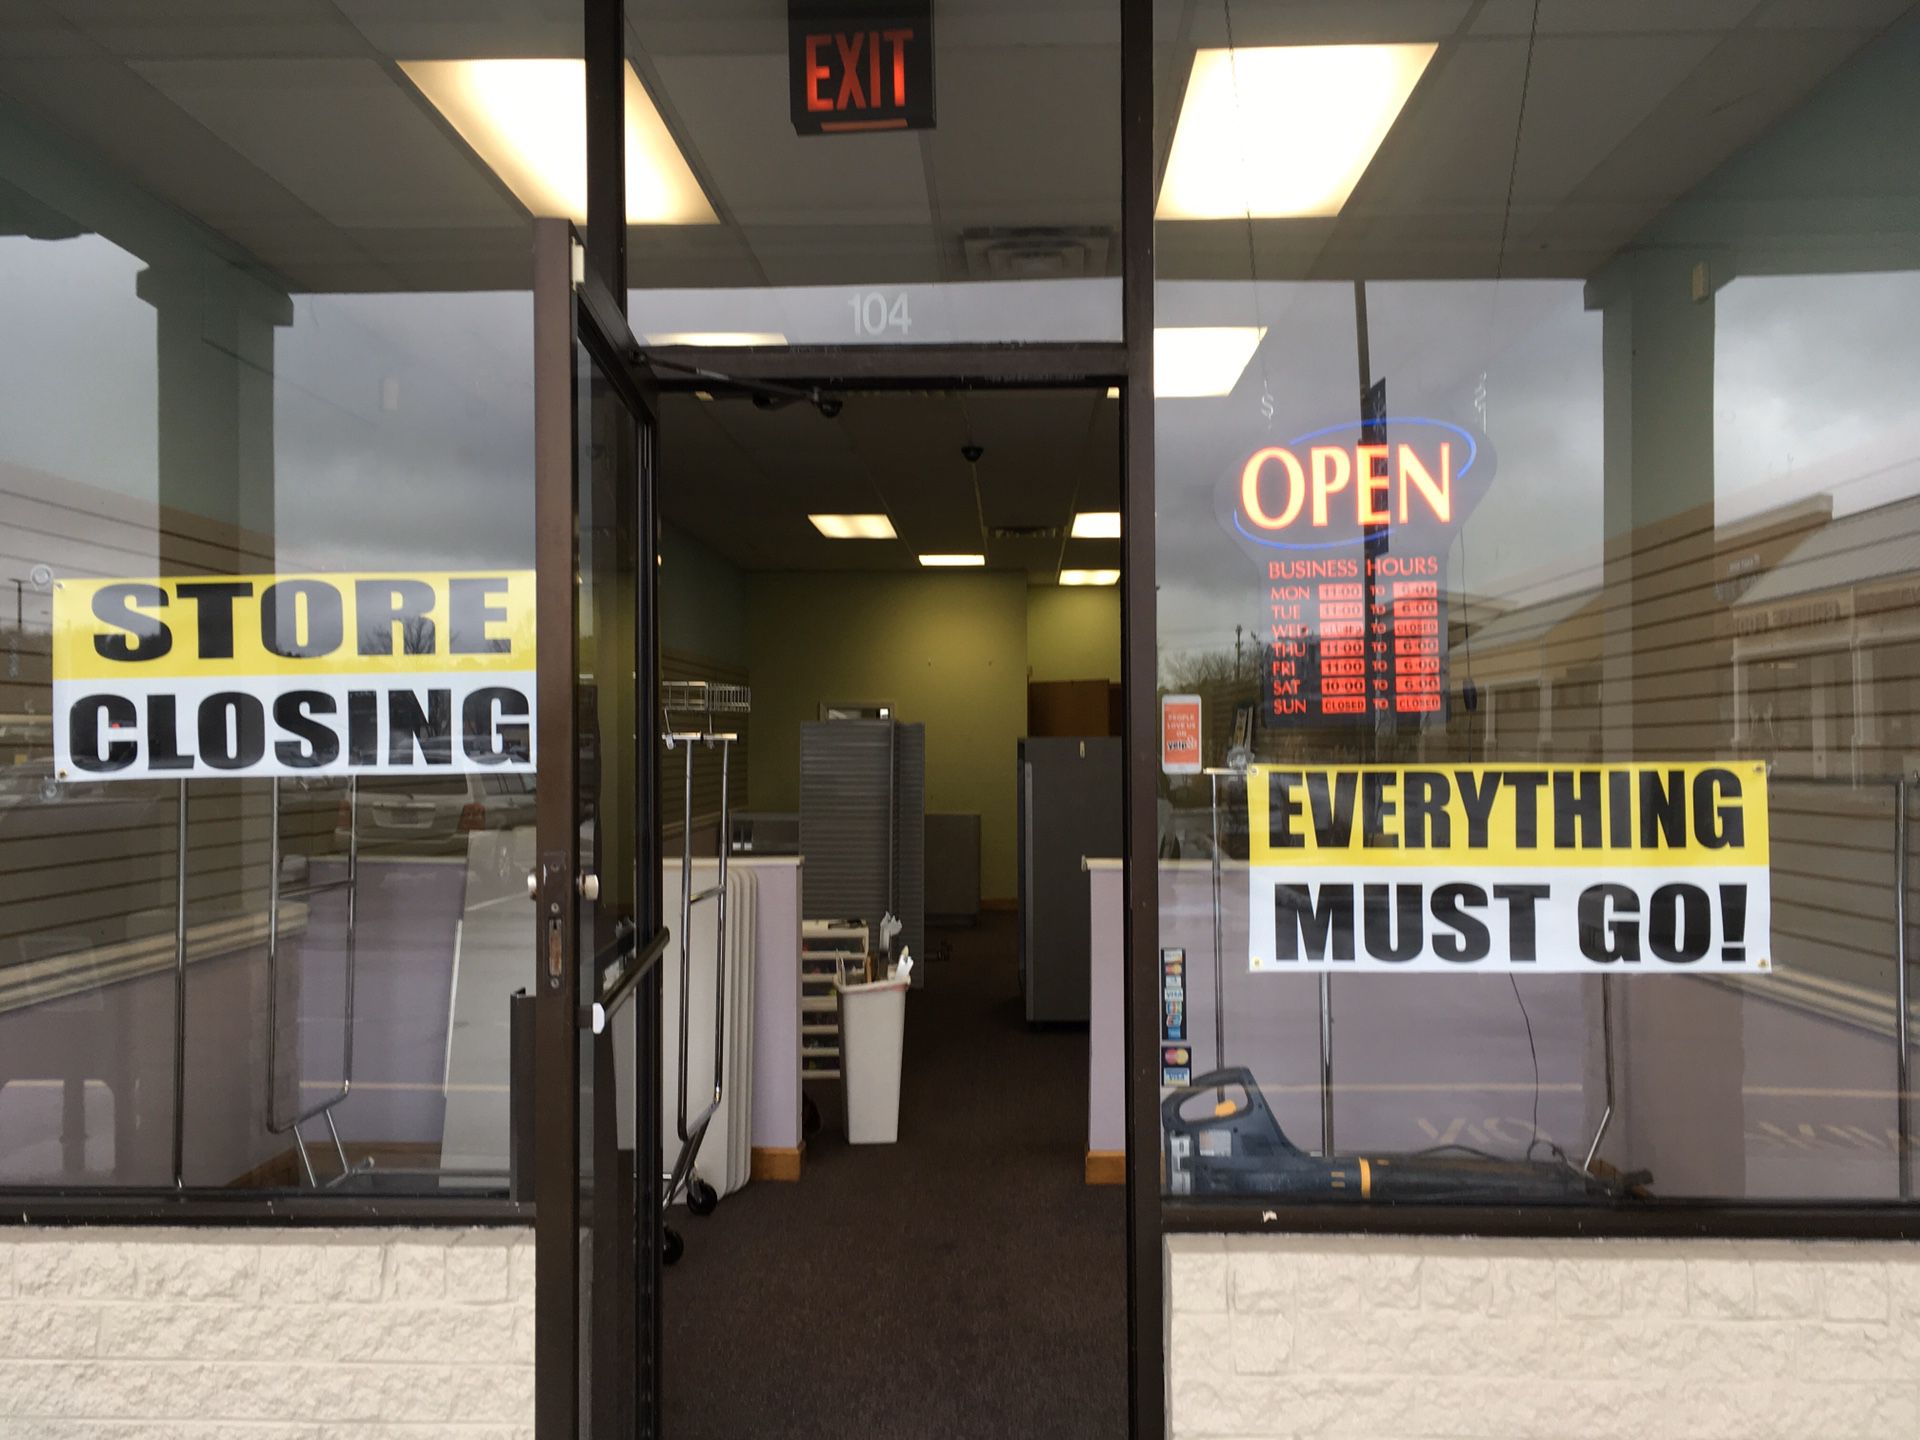 2 STORE FRONT BANNERS- STORE CLOSING AND EVERYTHING MUST GO.